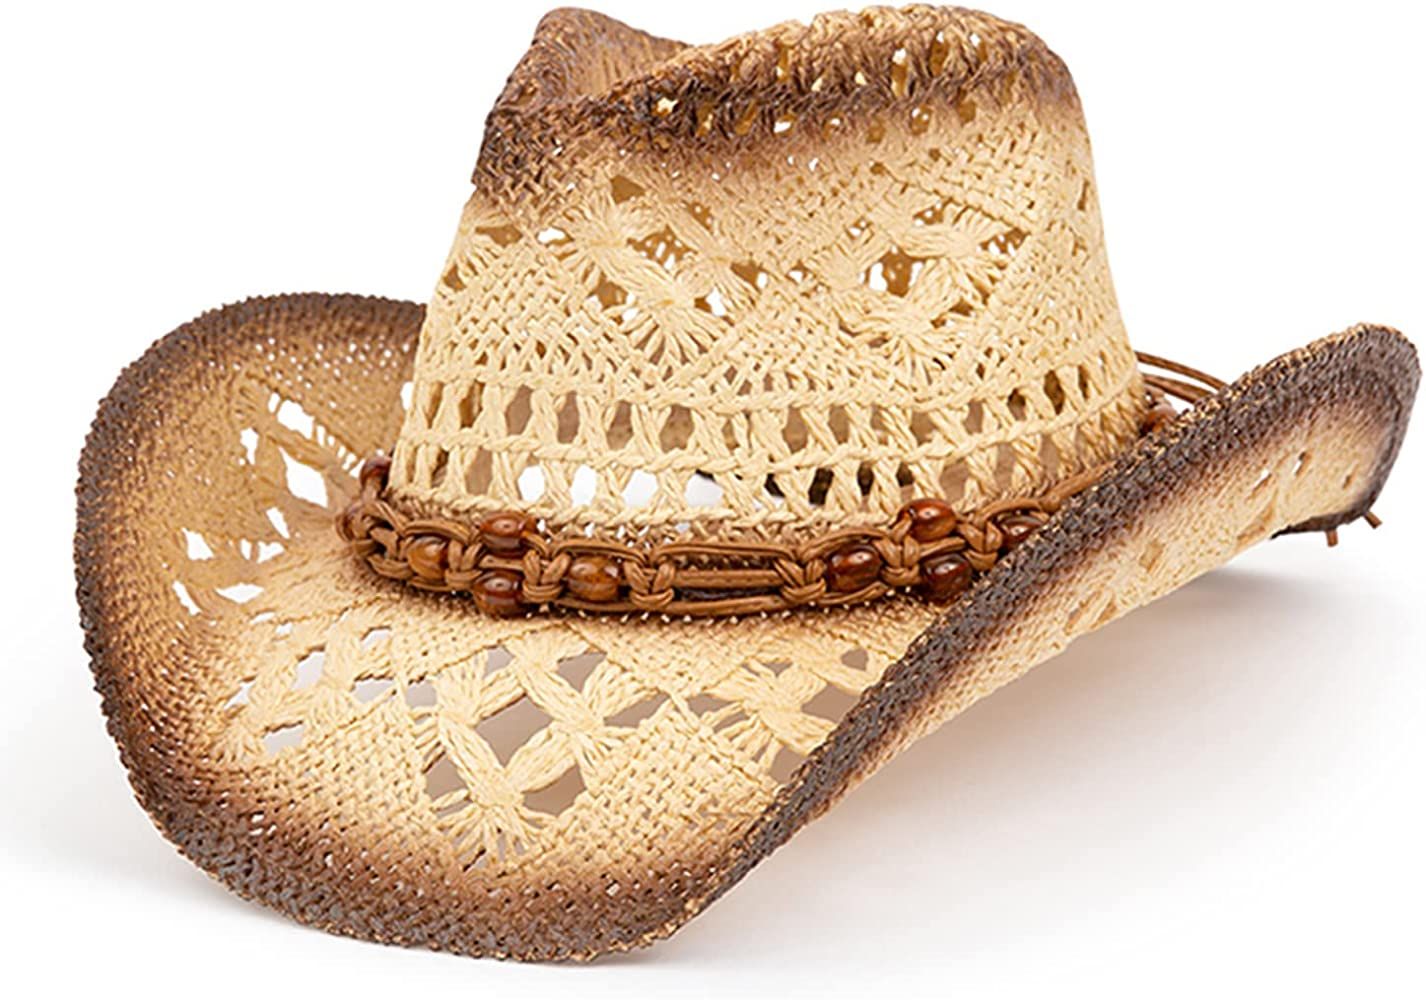 TOVOSO Straw Cowboy Hat for Women and Men with Shape-It Brim, Western Cowboy Hat | Amazon (US)